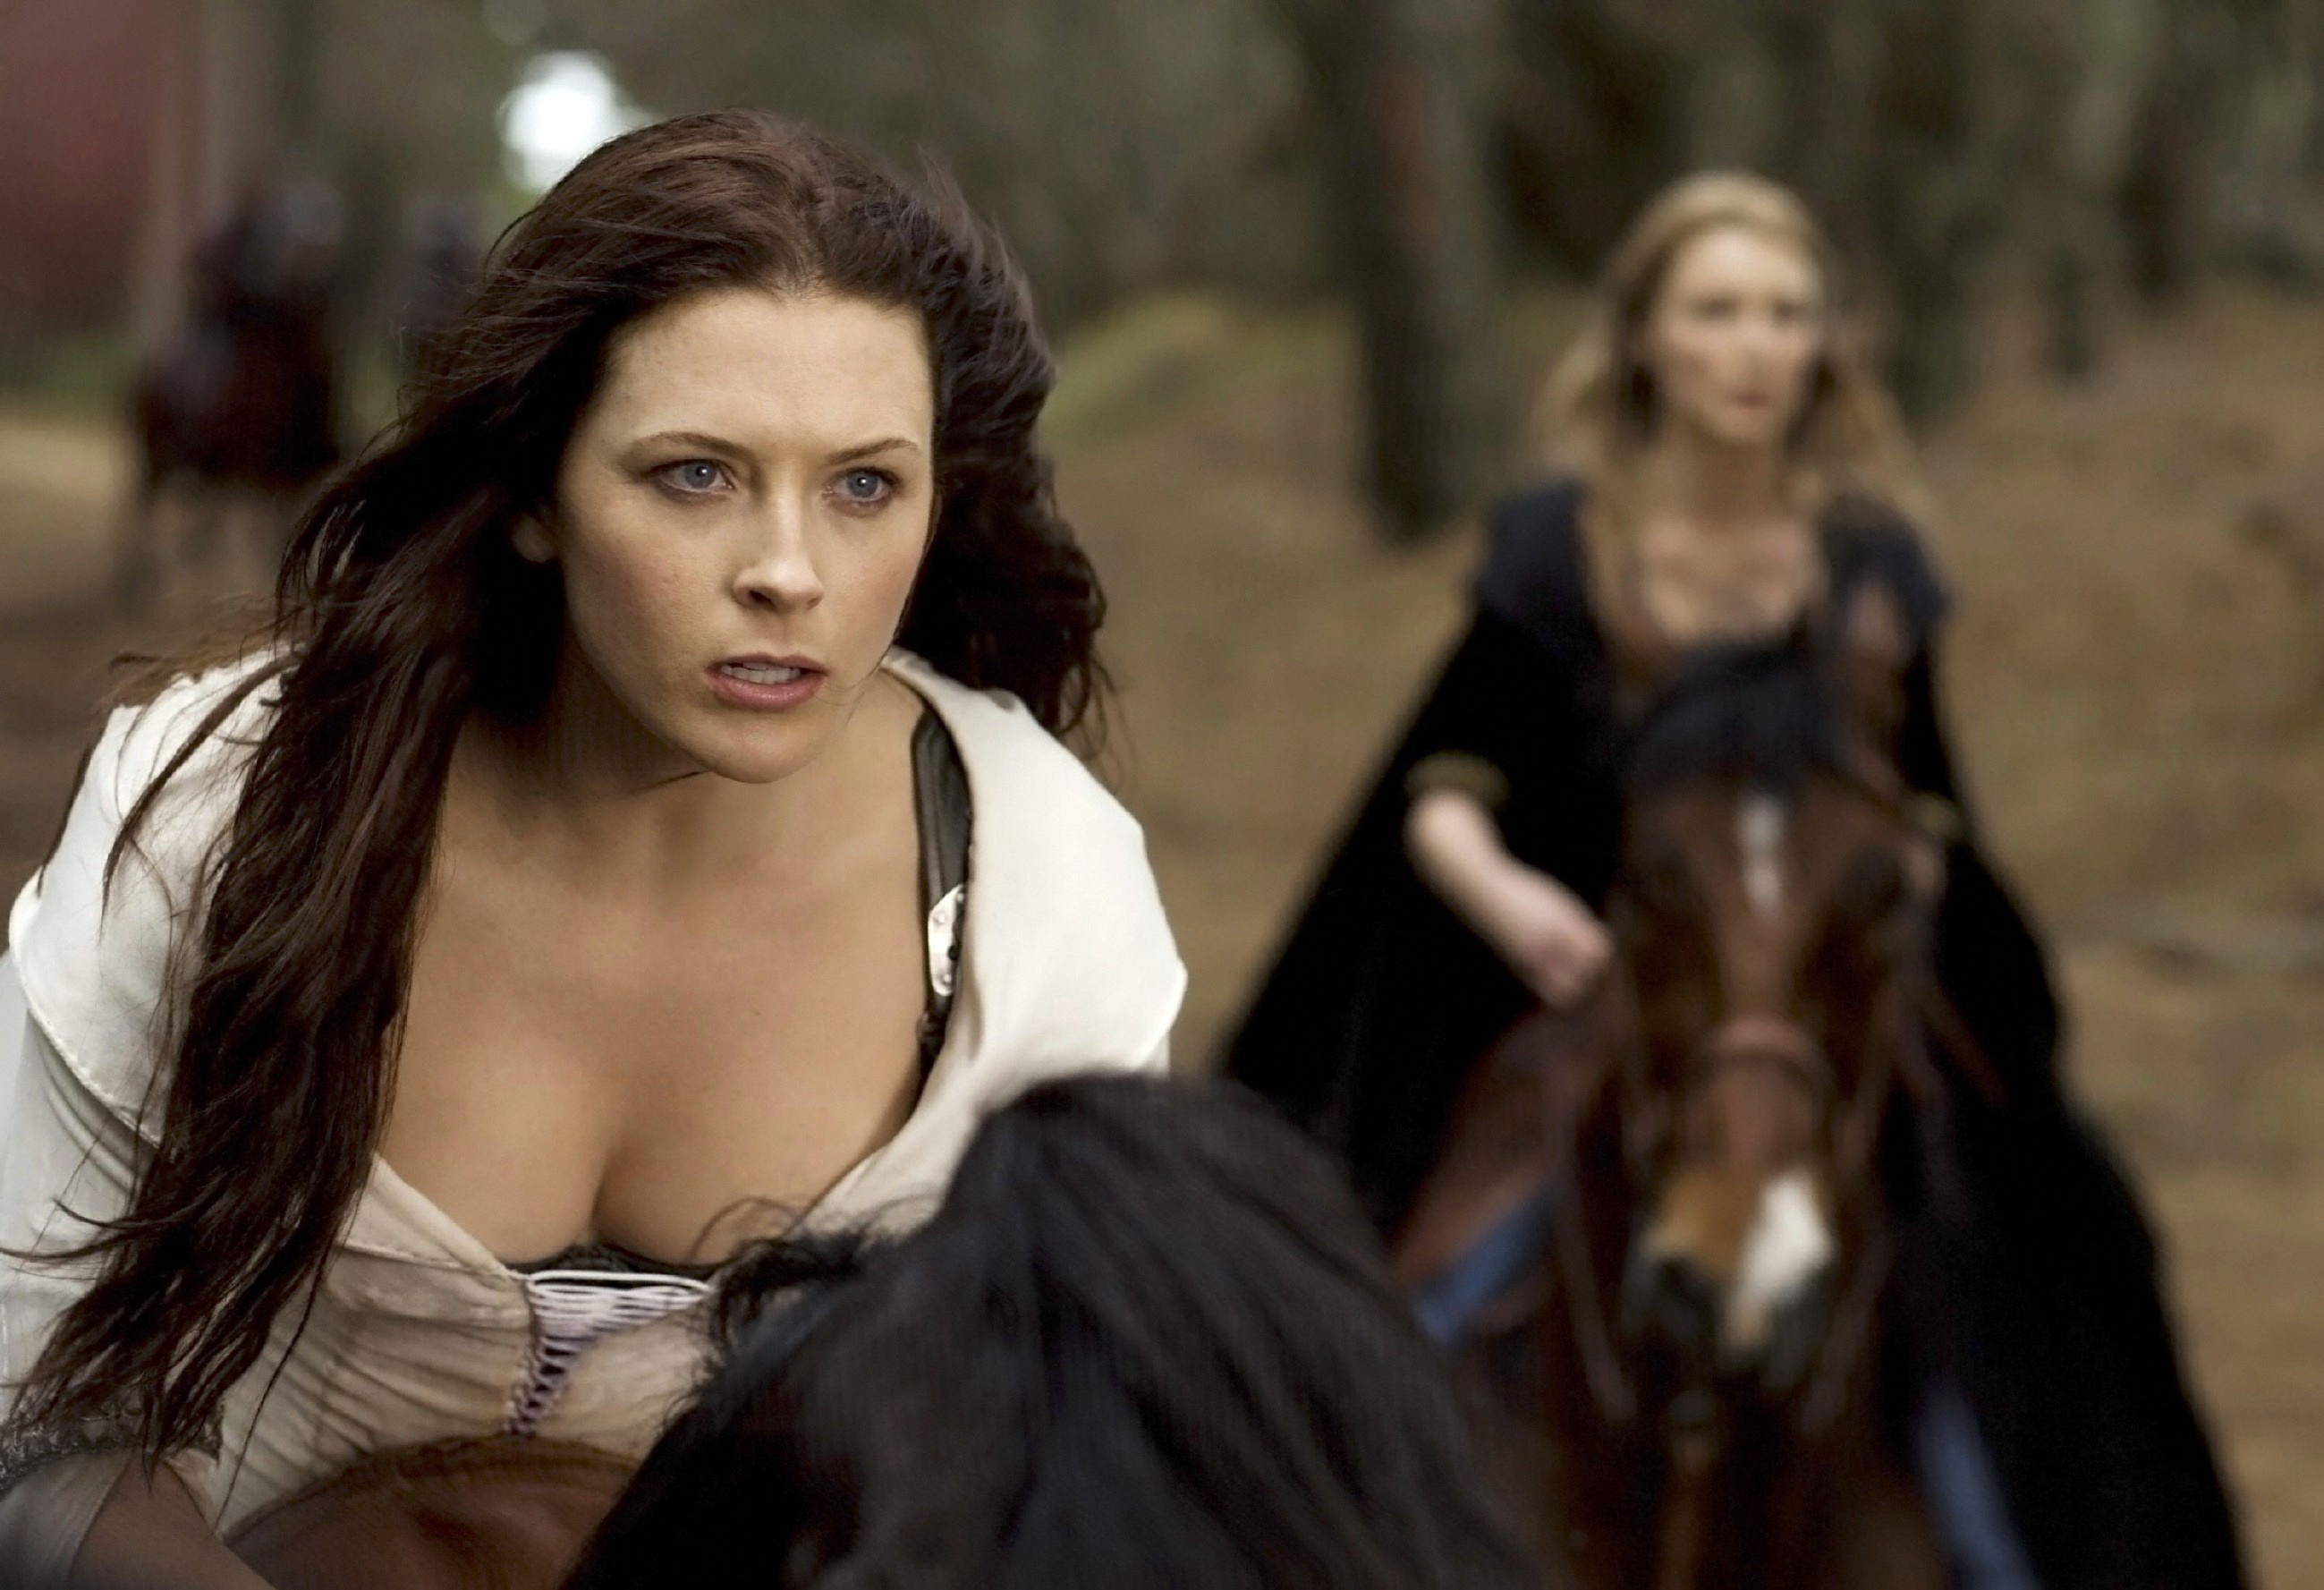 Legend of the Seeker (TV Series): Bridget Regan as Kahlan Amnell, The last living Confessor after Darken Rahl hunted all the others down. 2600x1780 HD Wallpaper.